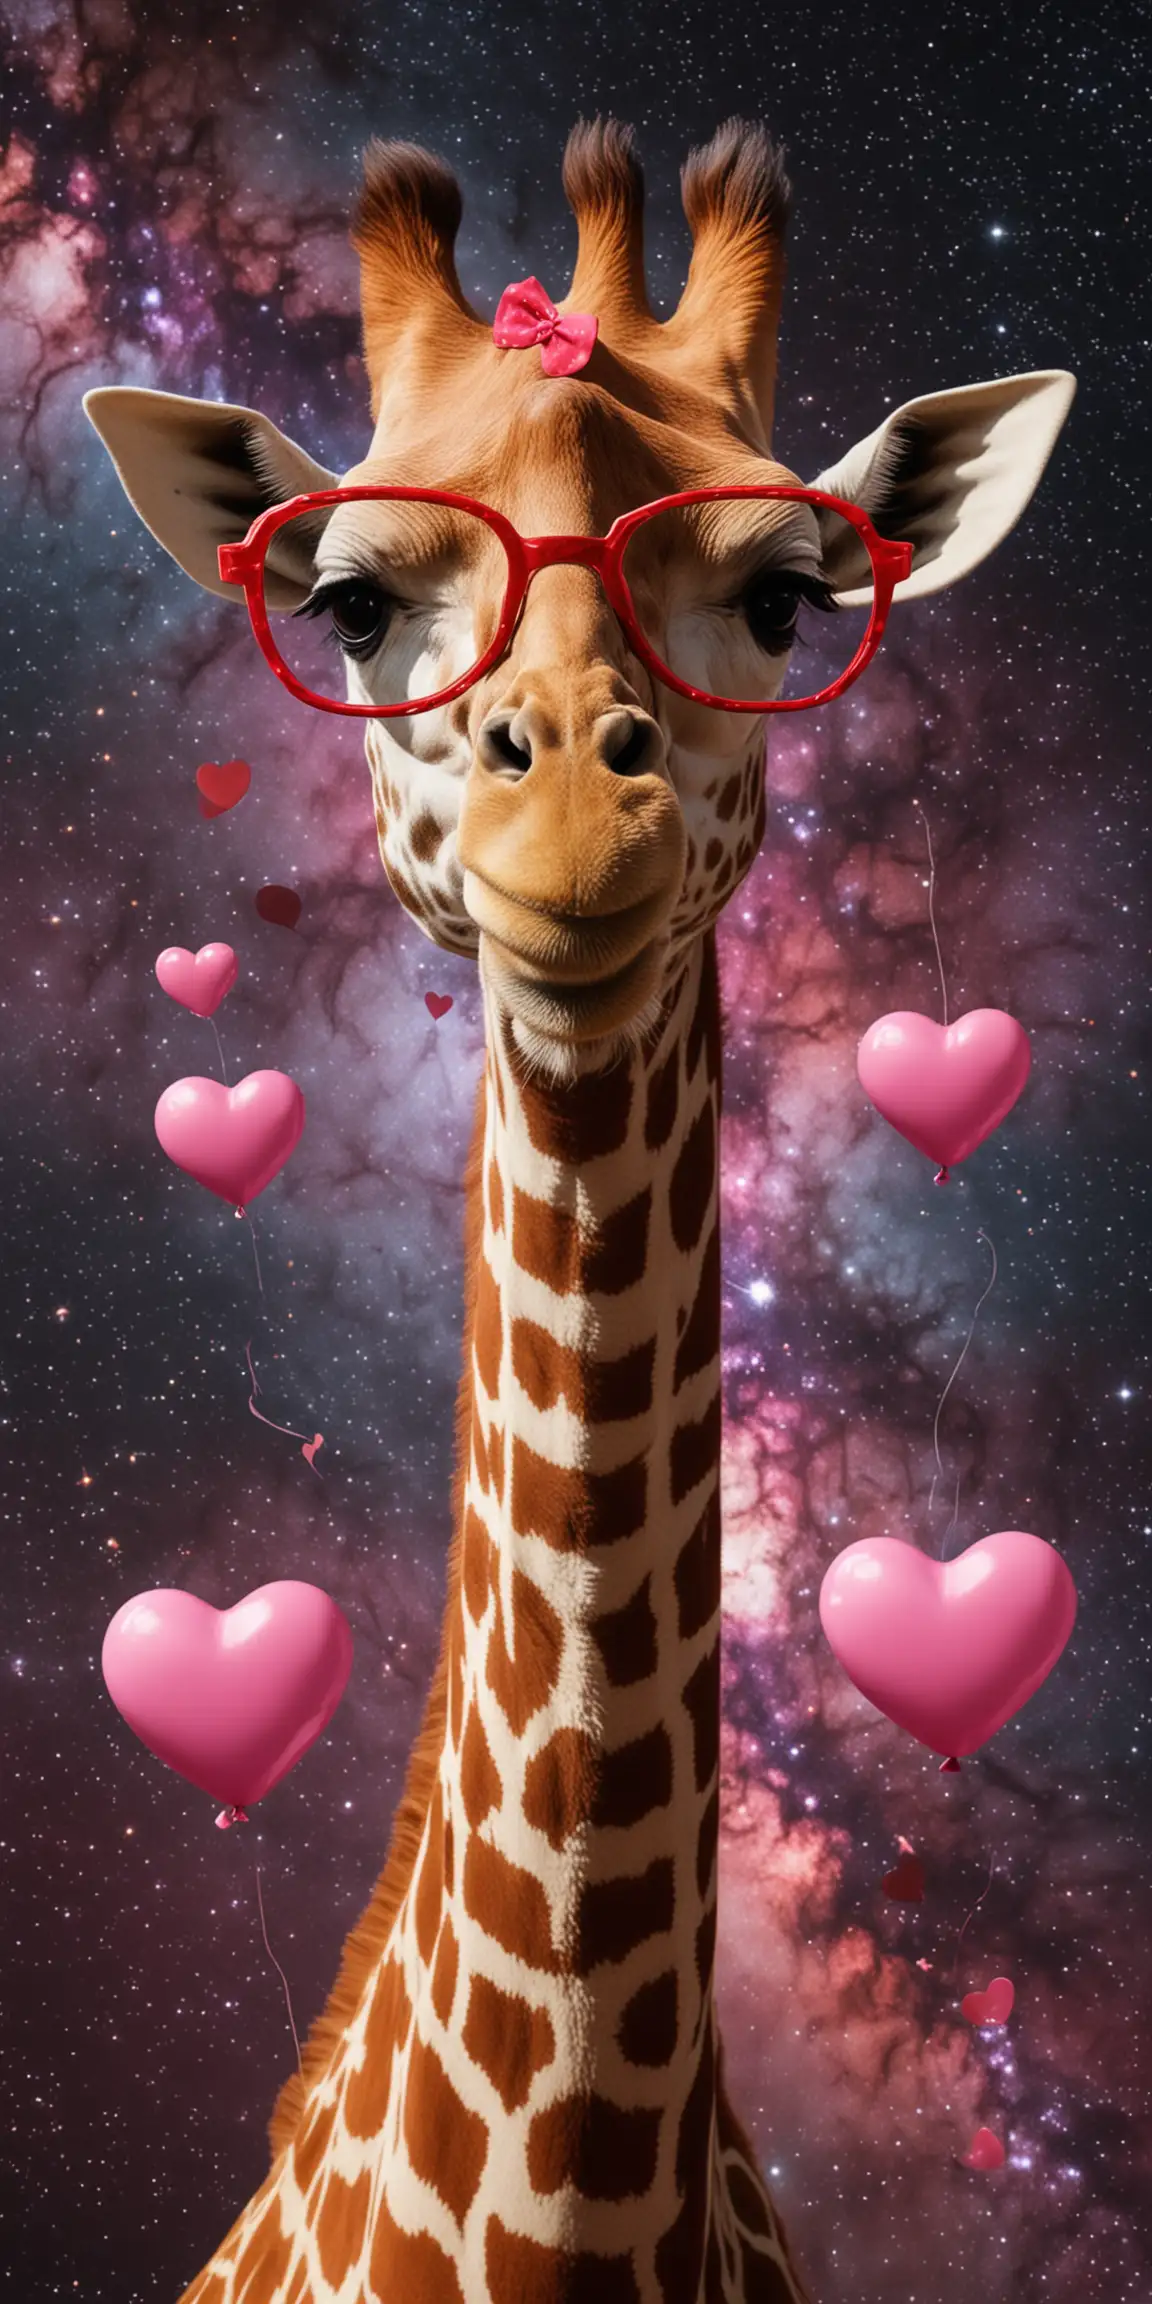 Giraffe with glasses in the space with valentine hearths


